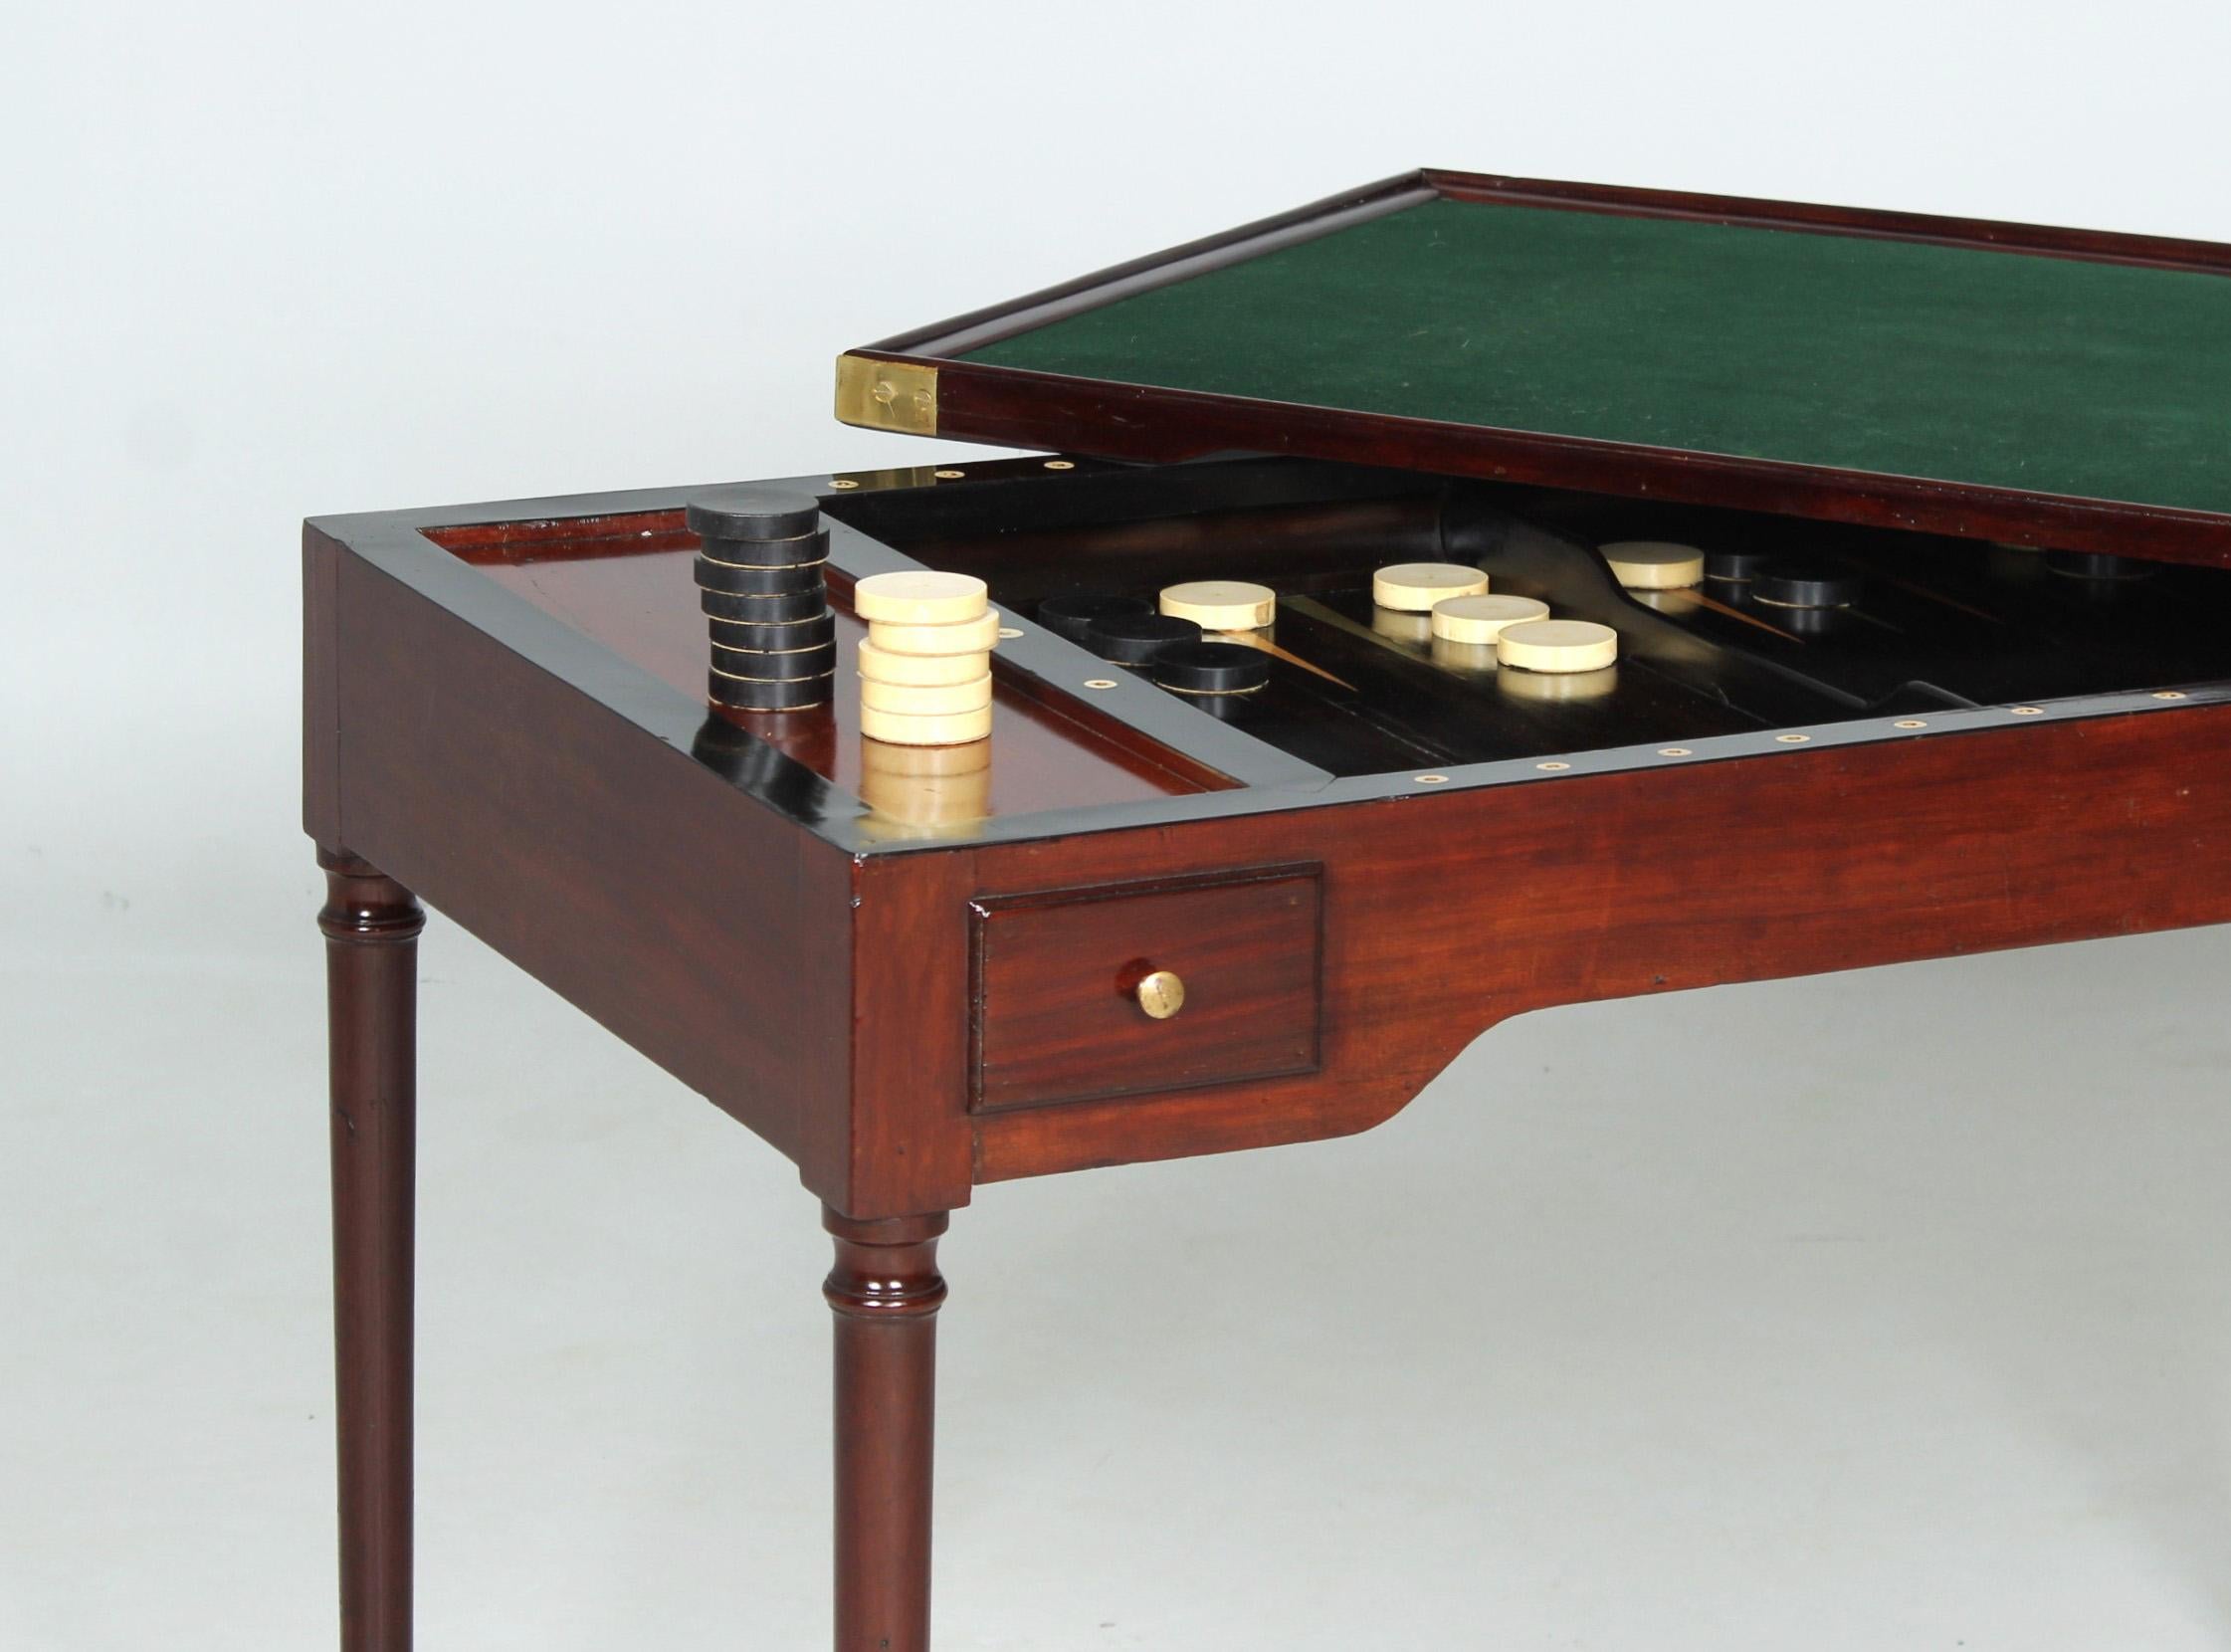 Antique Tric Trac game table

France
Mahogany
Directoire around 1800

Dimensions: H x W x D: 77 x 114 x 64 cm

Description:
Piece of furniture standing on round legs with brass surrounds.

In the frame, from both sides, there are one long drawer and